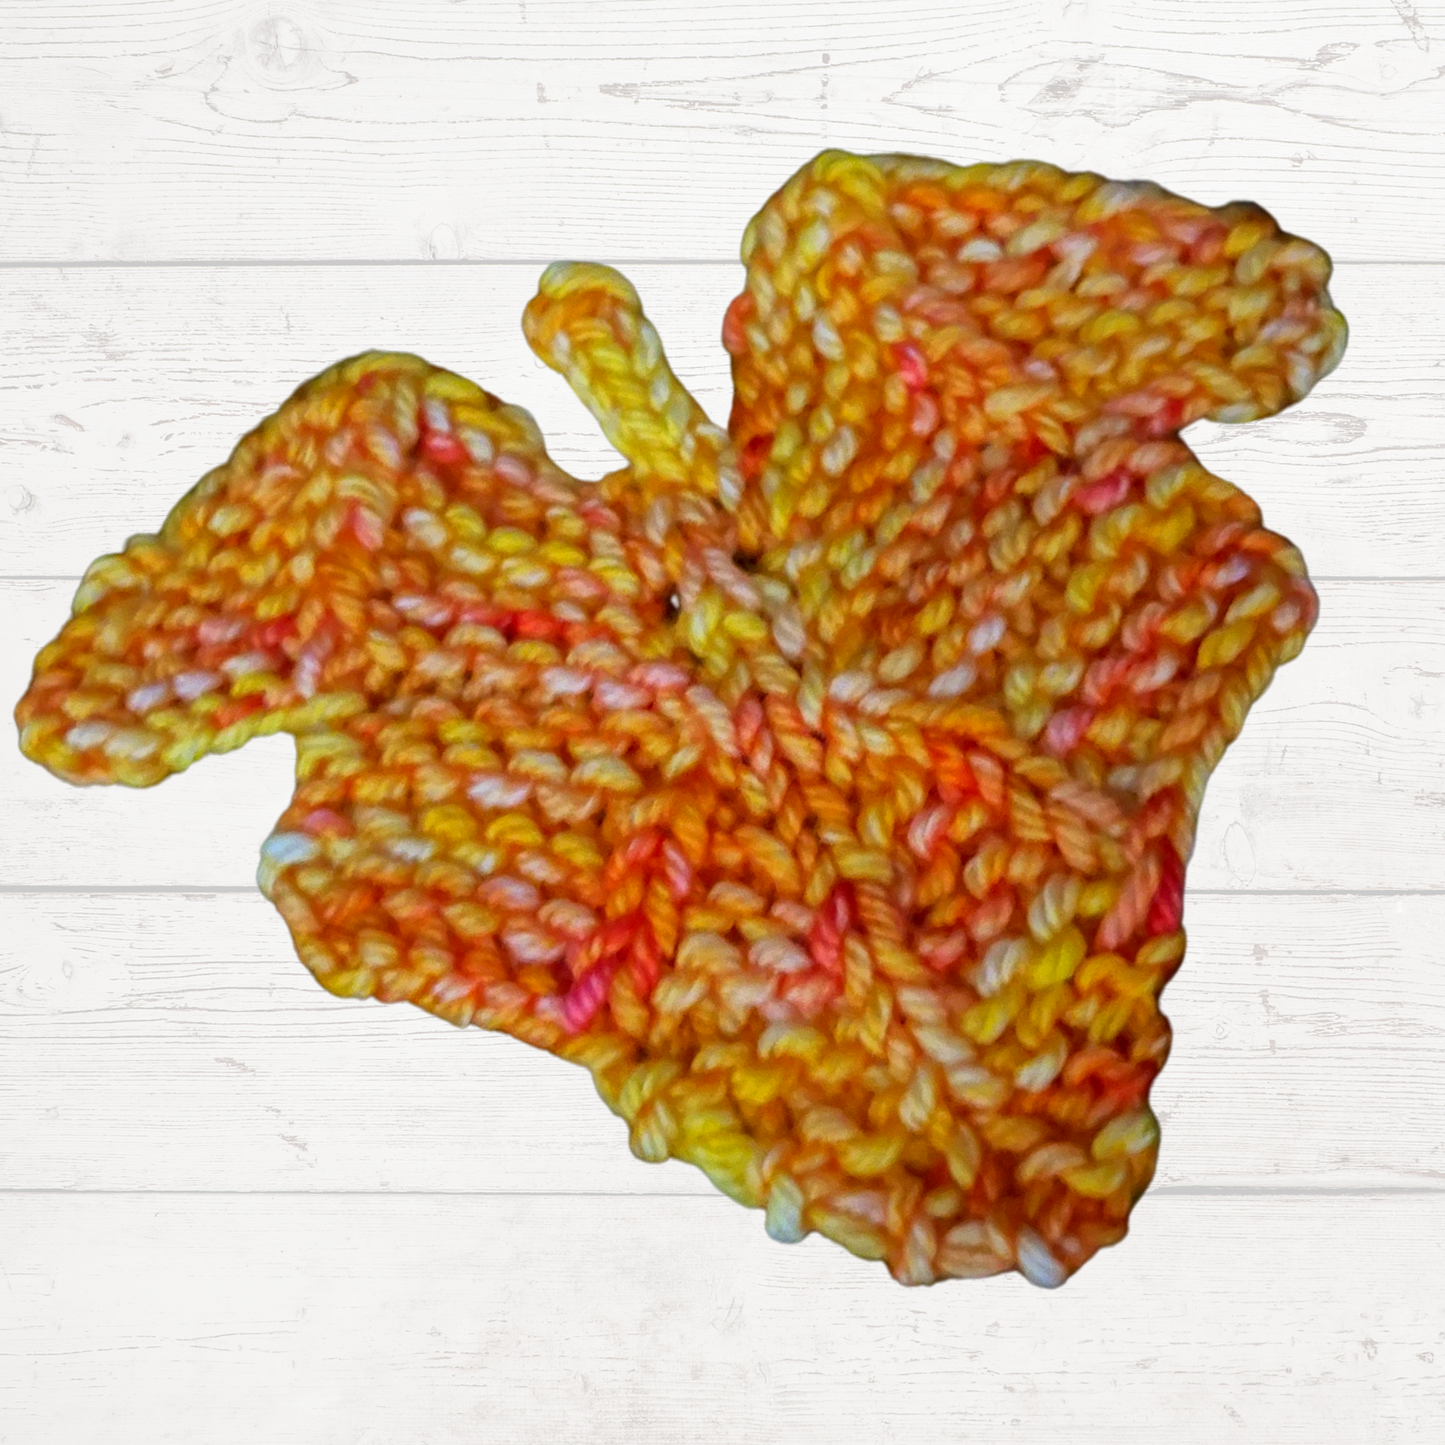 Fallen Leaves - A variegated hand dyed yarn